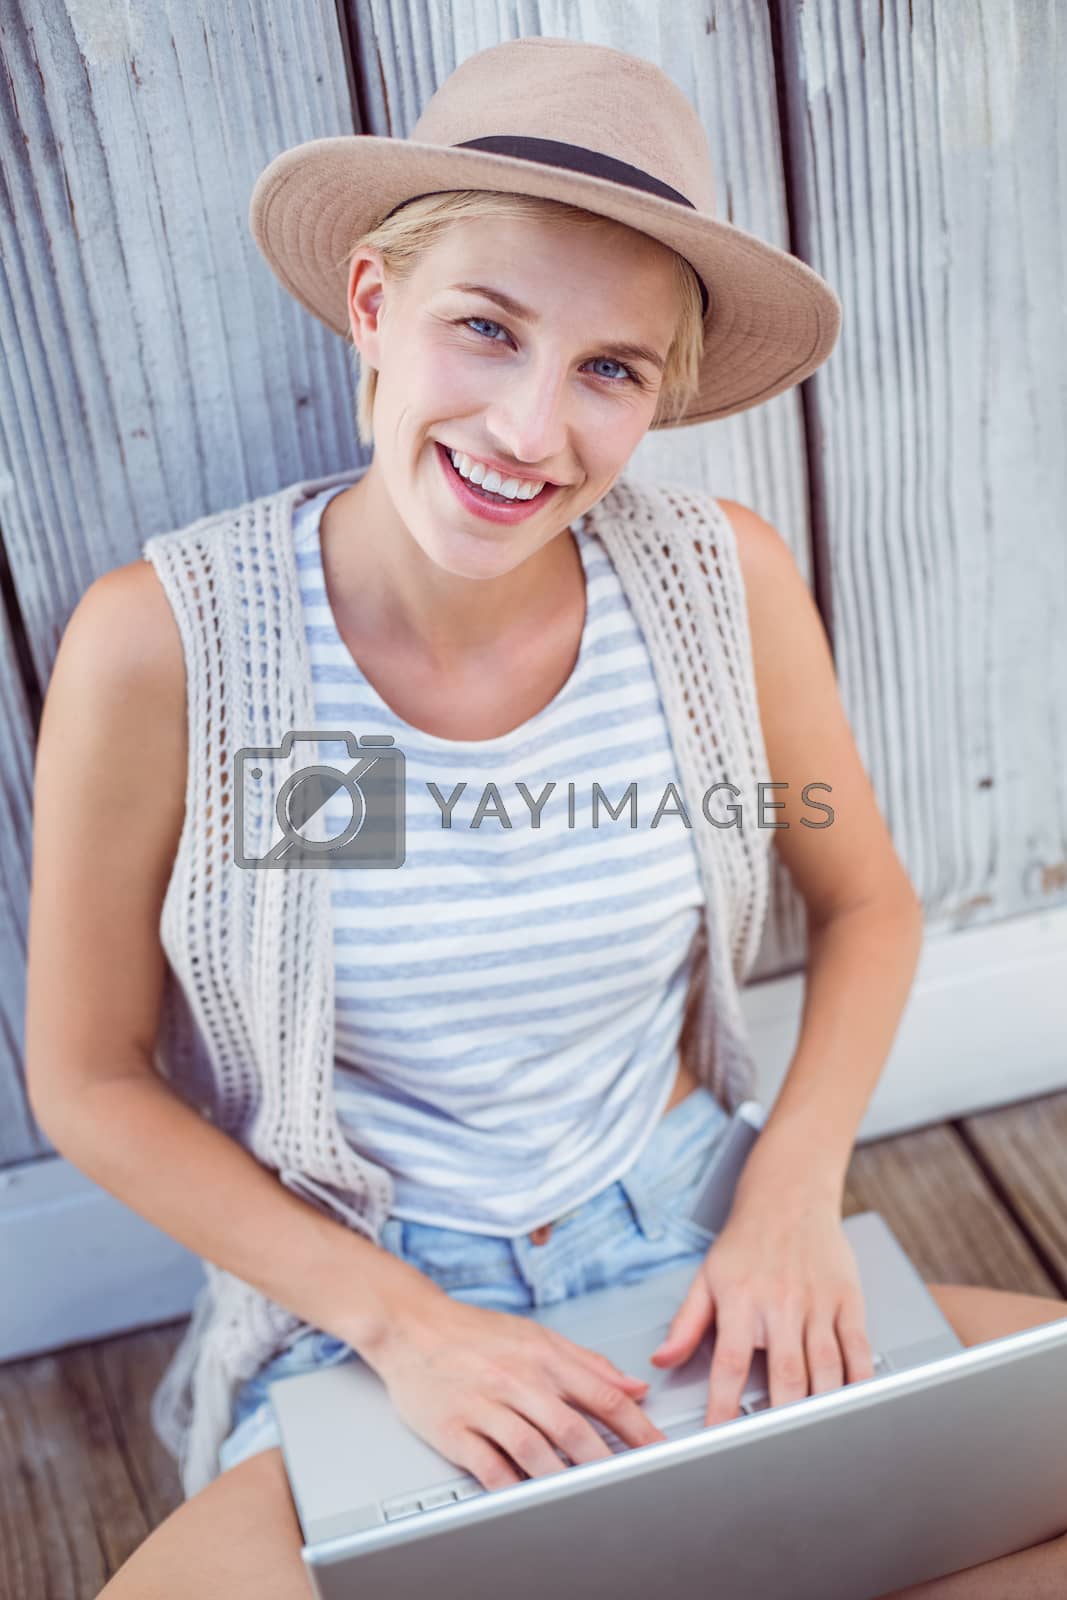 Royalty free image of Pretty blonde woman using her laptop by Wavebreakmedia